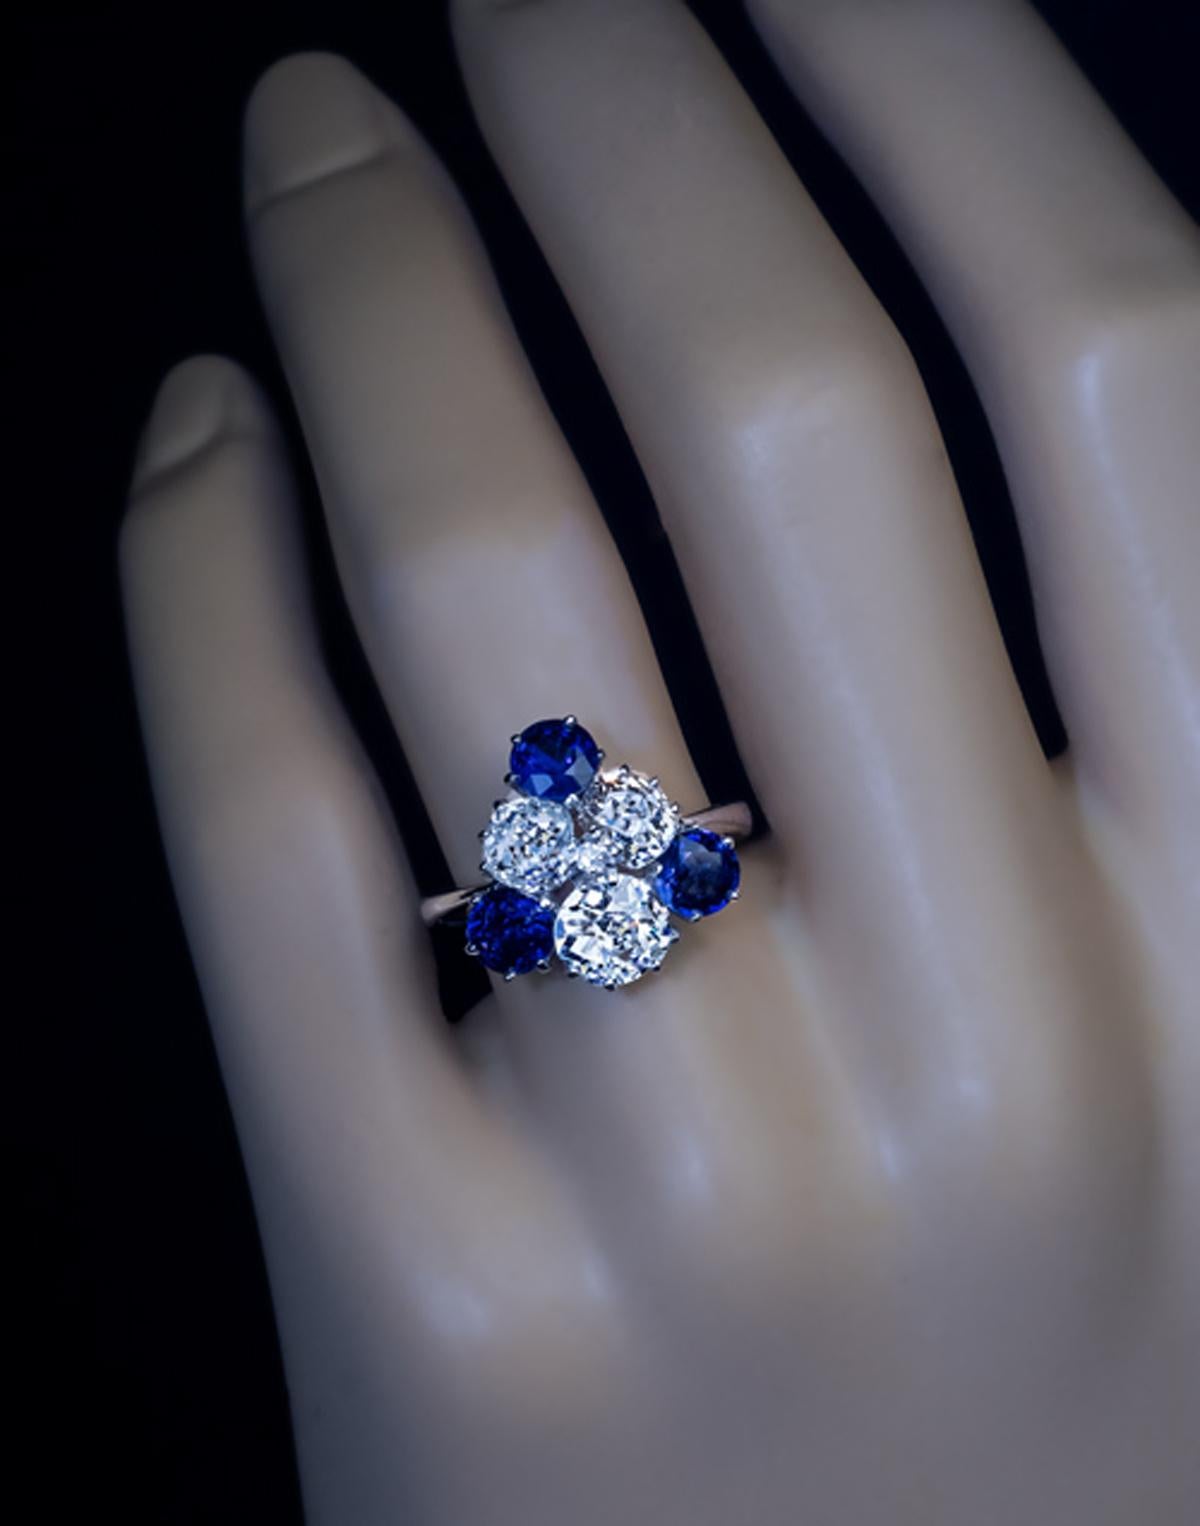 A mid century (circa 1950) 18K white gold cluster ring is designed as a stylized flower set with three chunky old brilliant cut diamonds accented by three deep blue natural sapphires. A small single cut diamond is set between the three bigger